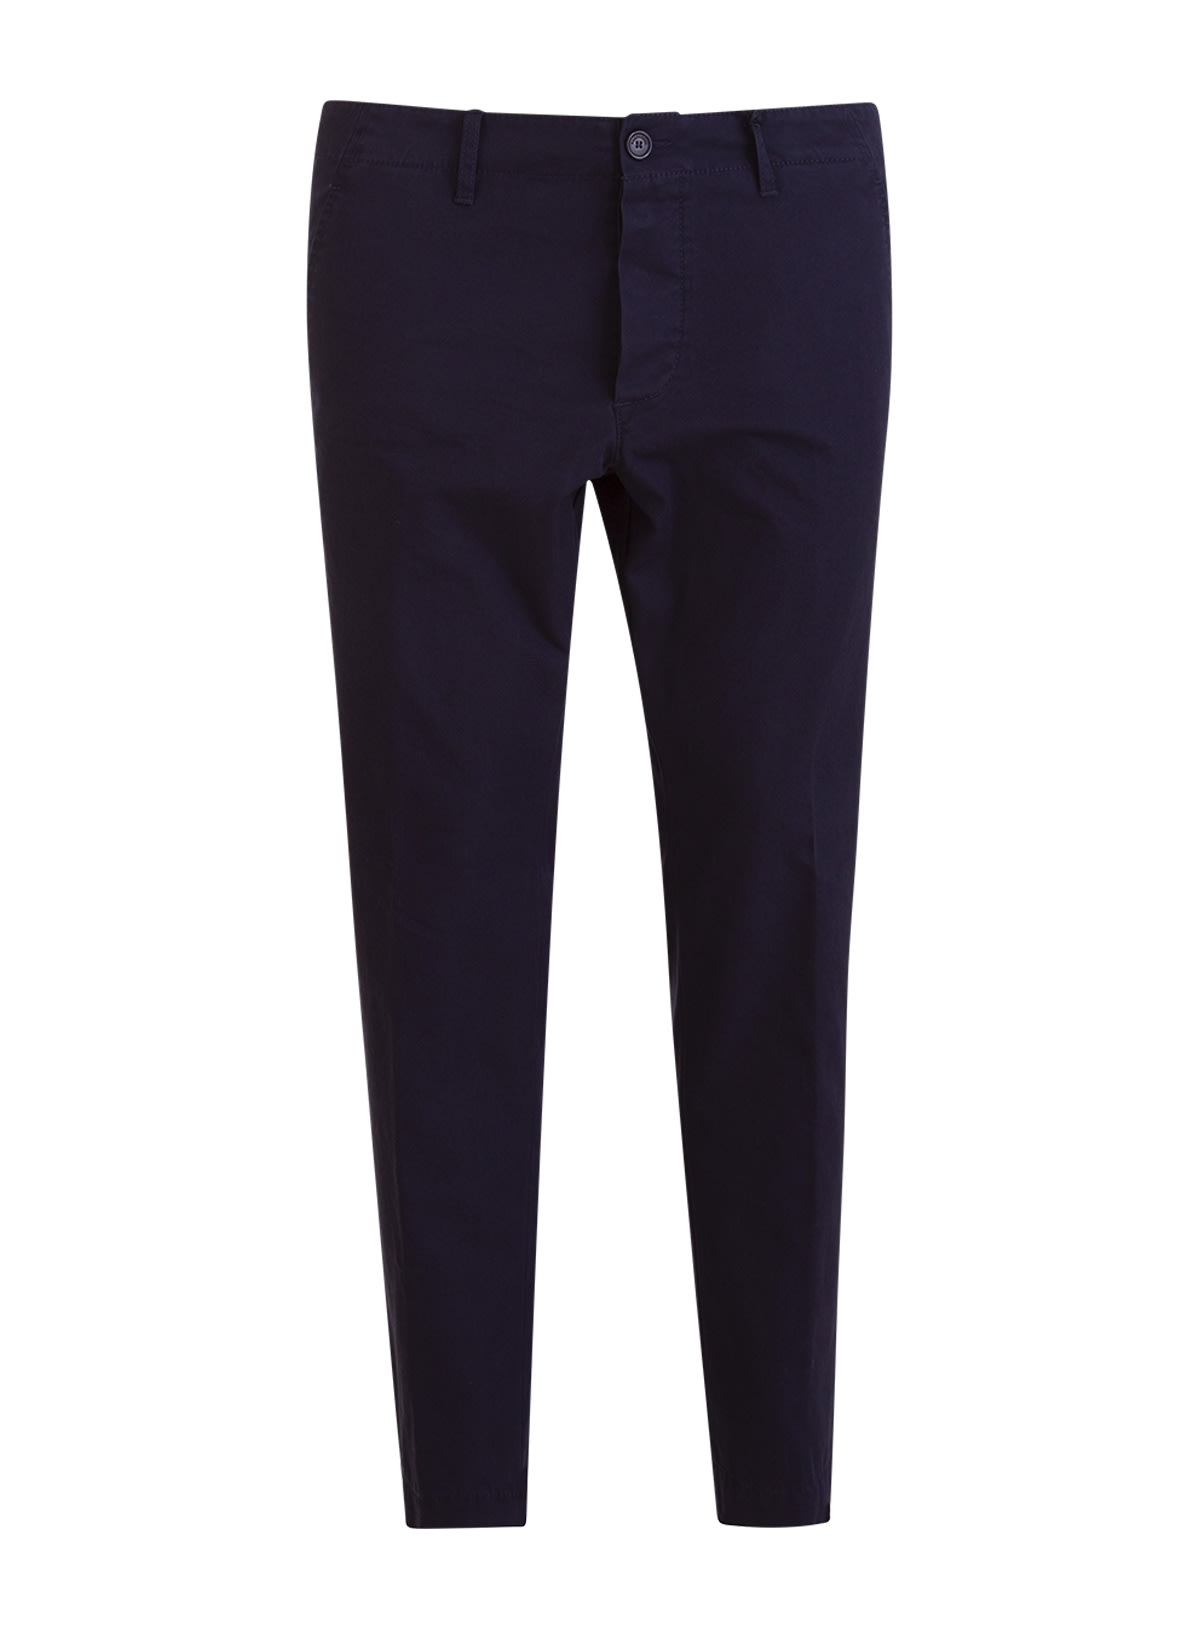 Dsquared2 Cropped Chino Trousers